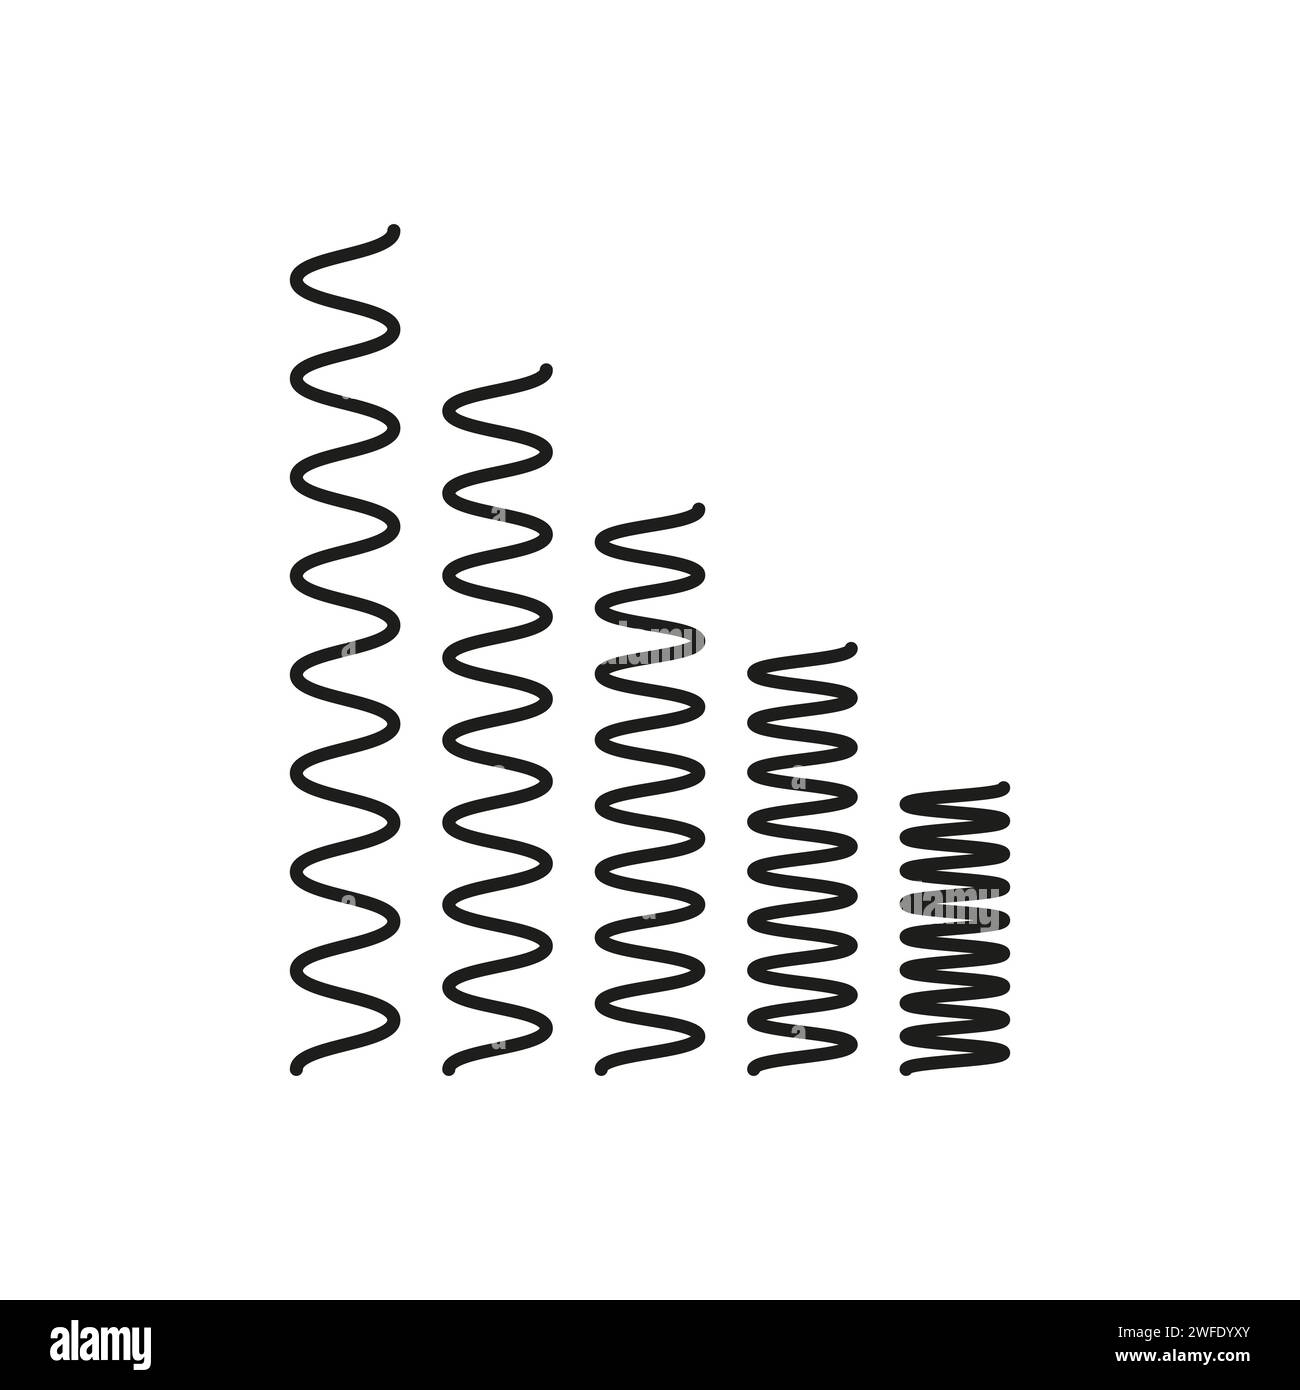 Set of metal springs. Vector illustration. Eps 10. Stock image. Stock Vector